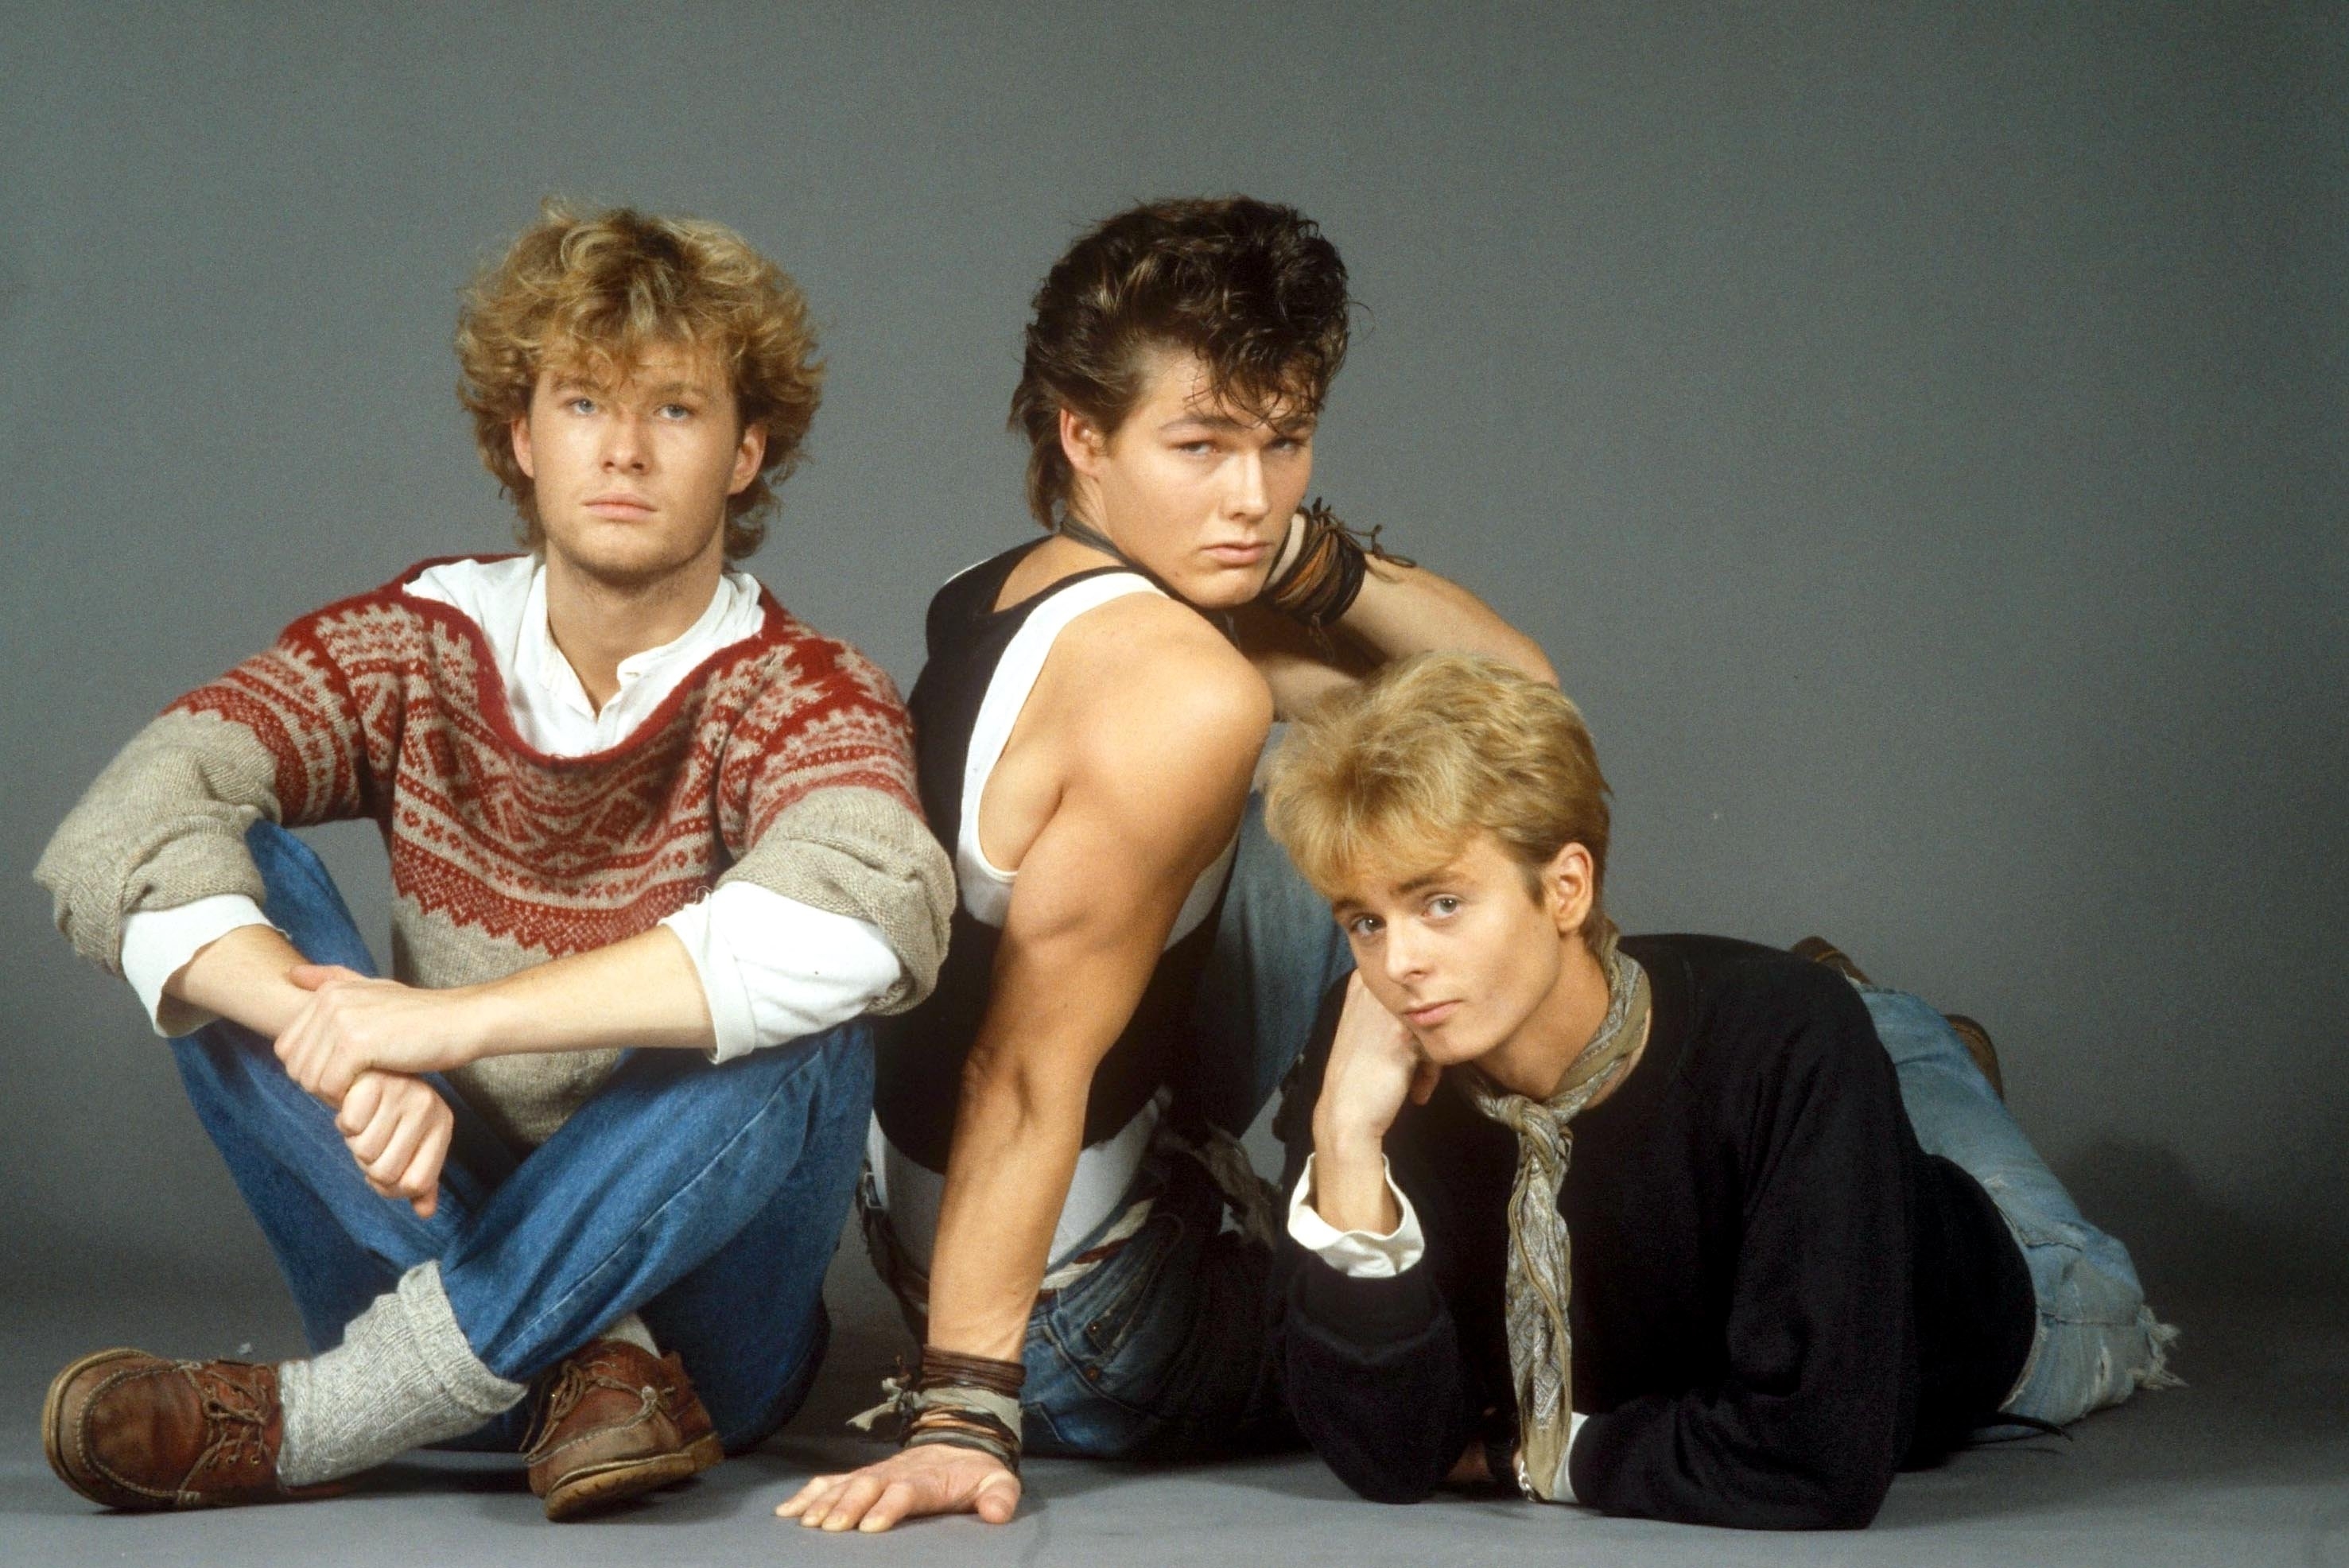 A-ha sitting on the ground in a promo shot